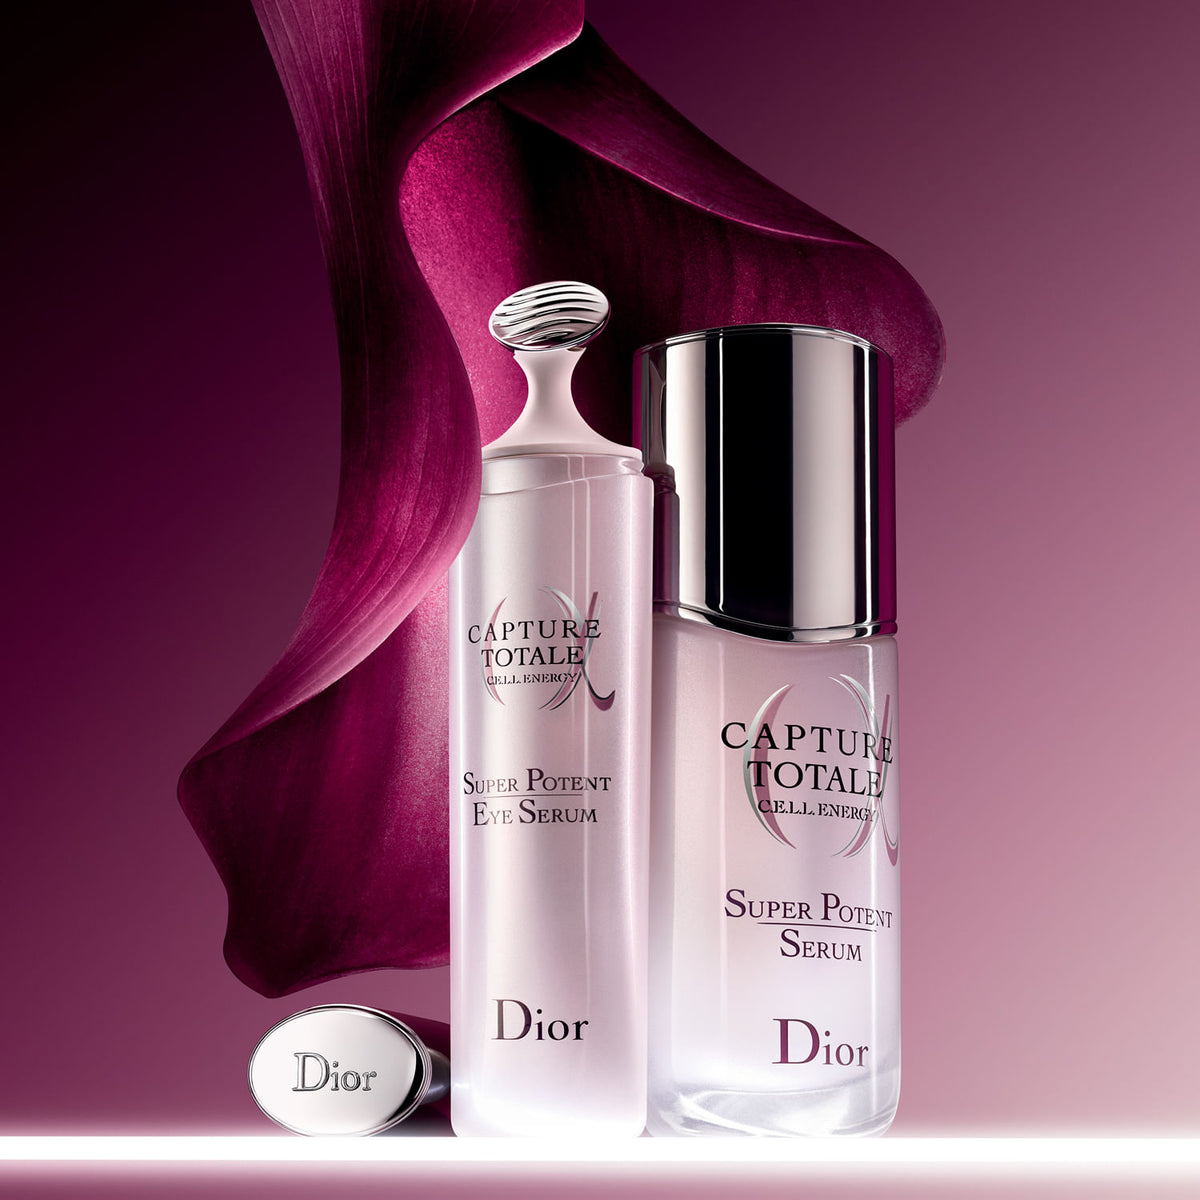 DIOR Capture Totale Cell Energy Super Potent Eye Serum